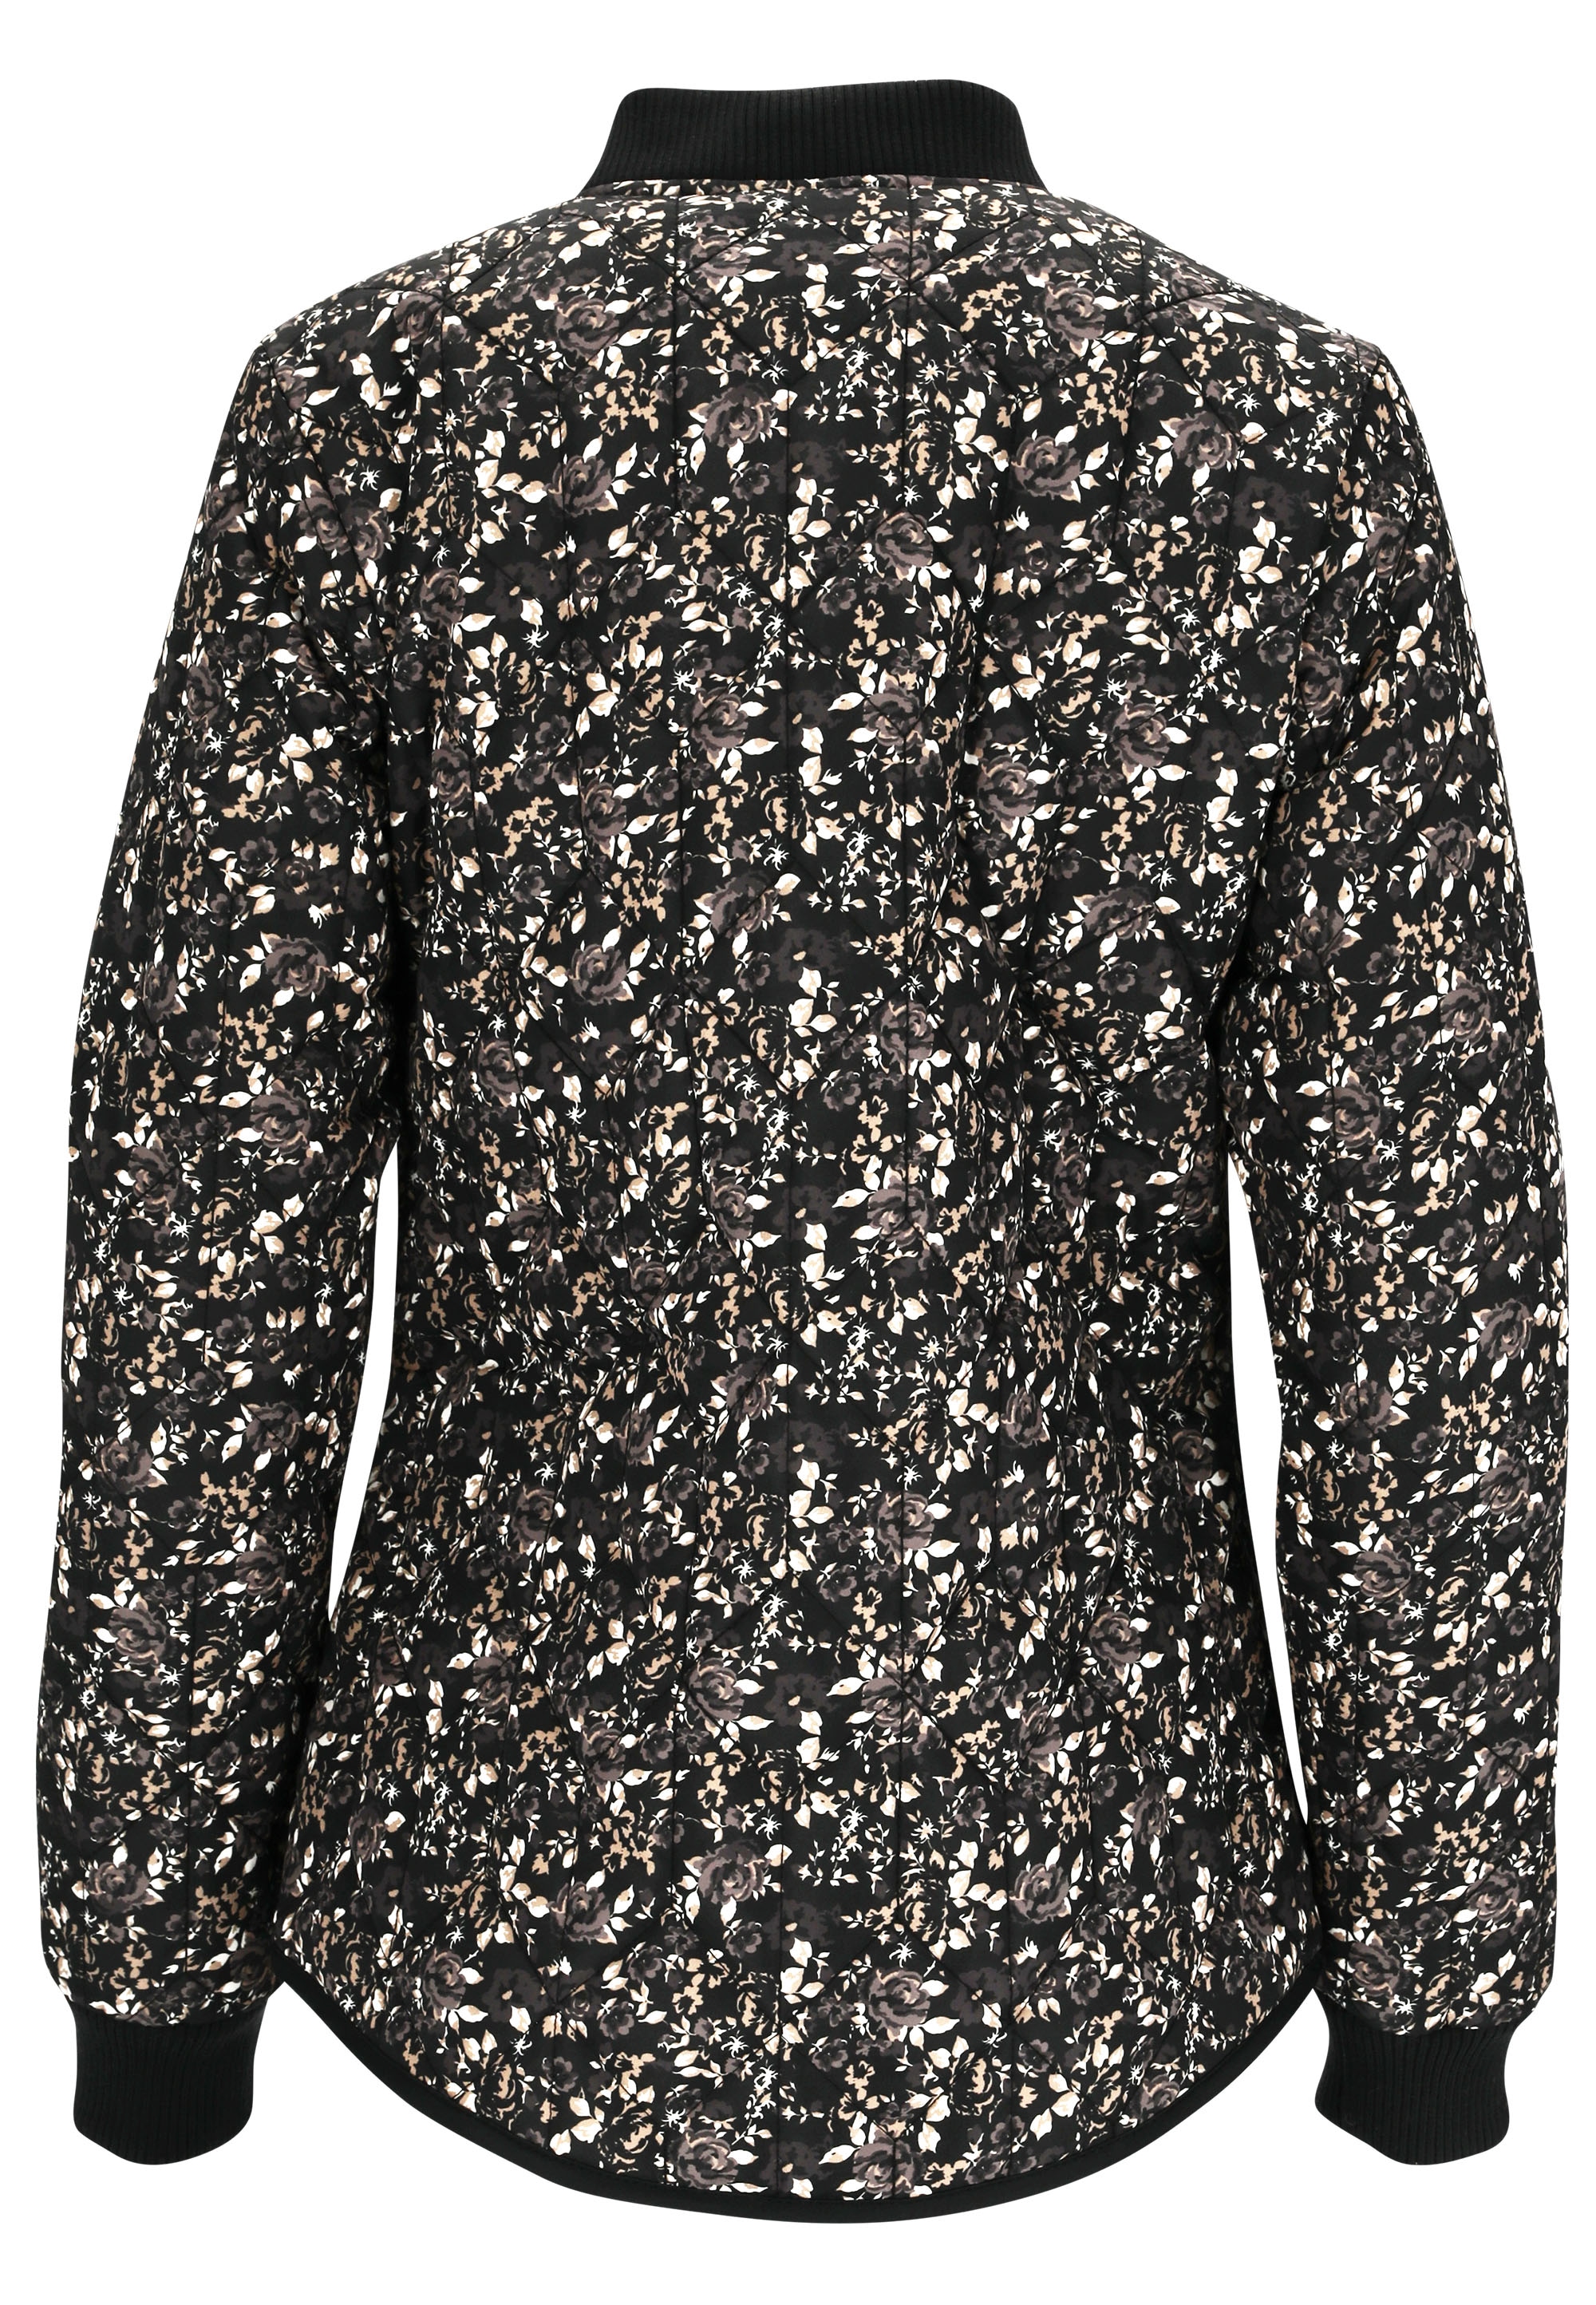 Outdoorjacke WEATHER REPORT Allover-Muster mit floralem online »Floral«,